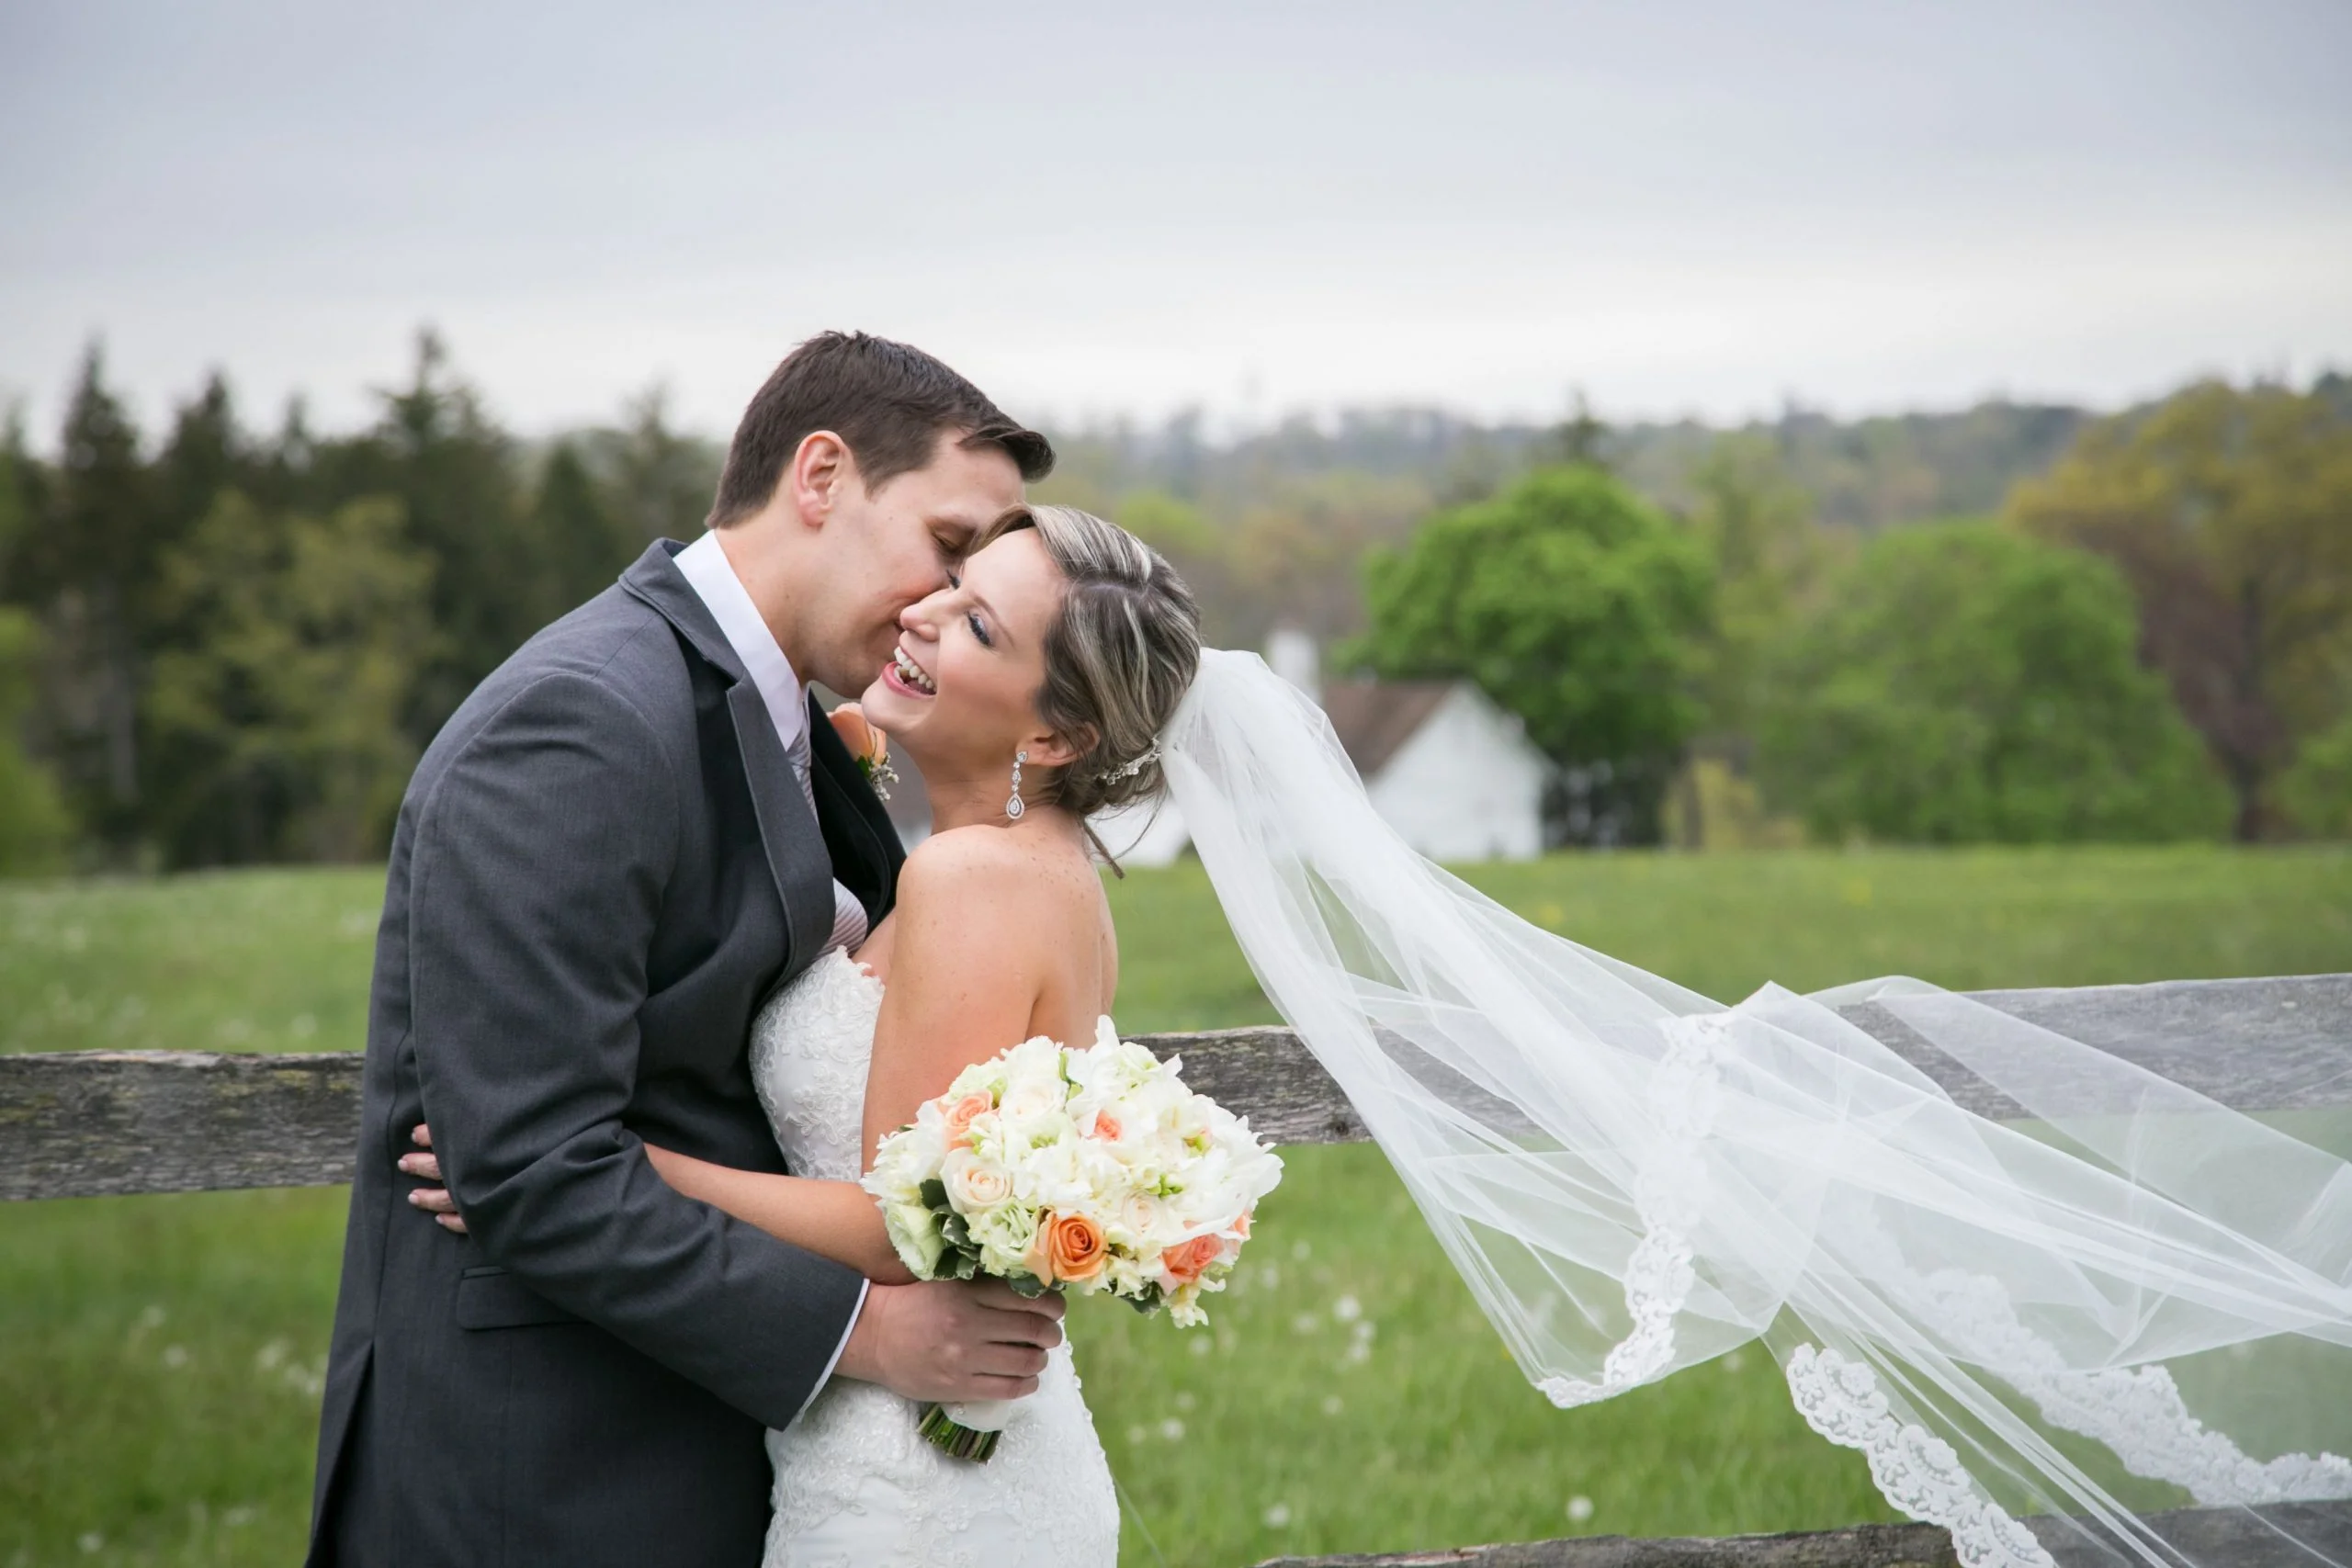 A bride and groom kiss in front of a fence in a field.